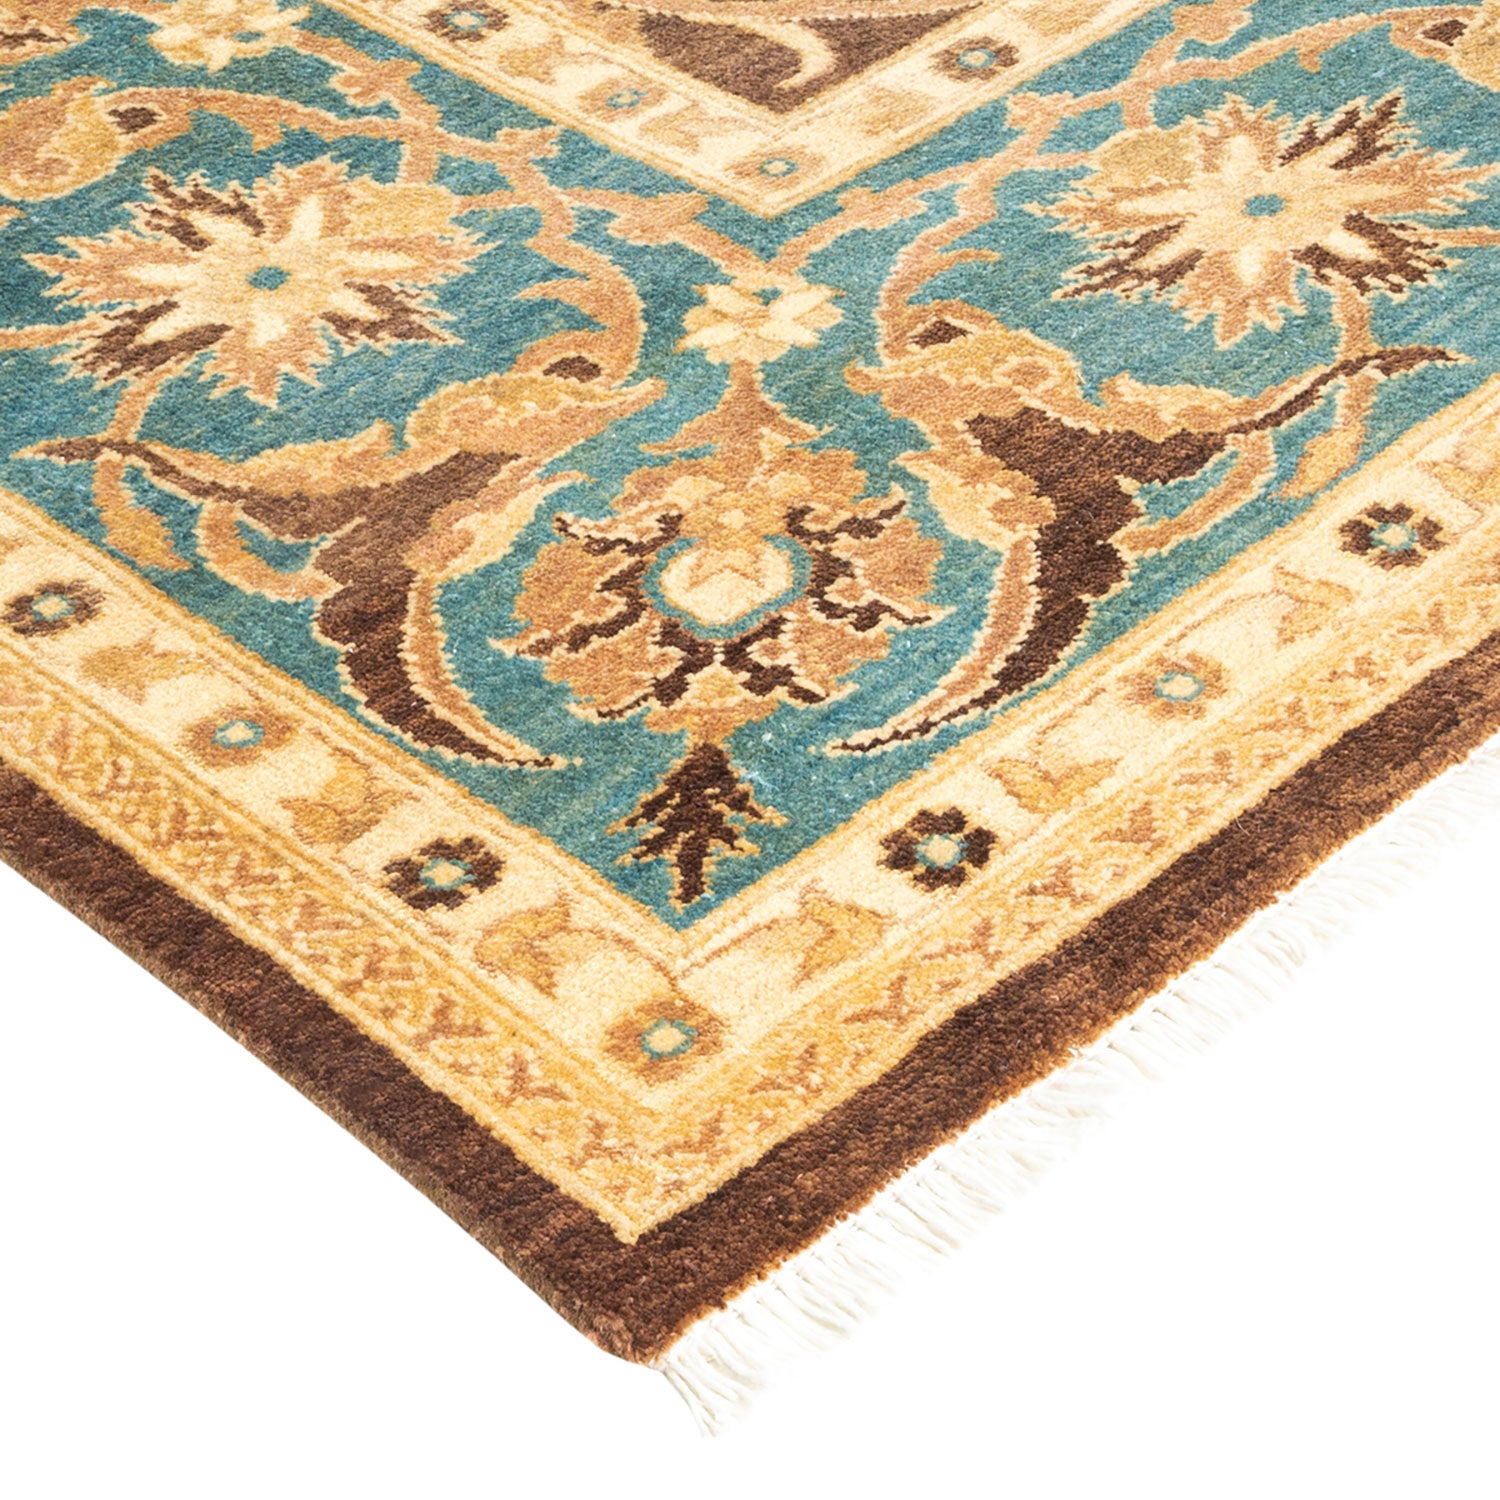 Ornate hand-woven rug with aqua central field and intricate patterns